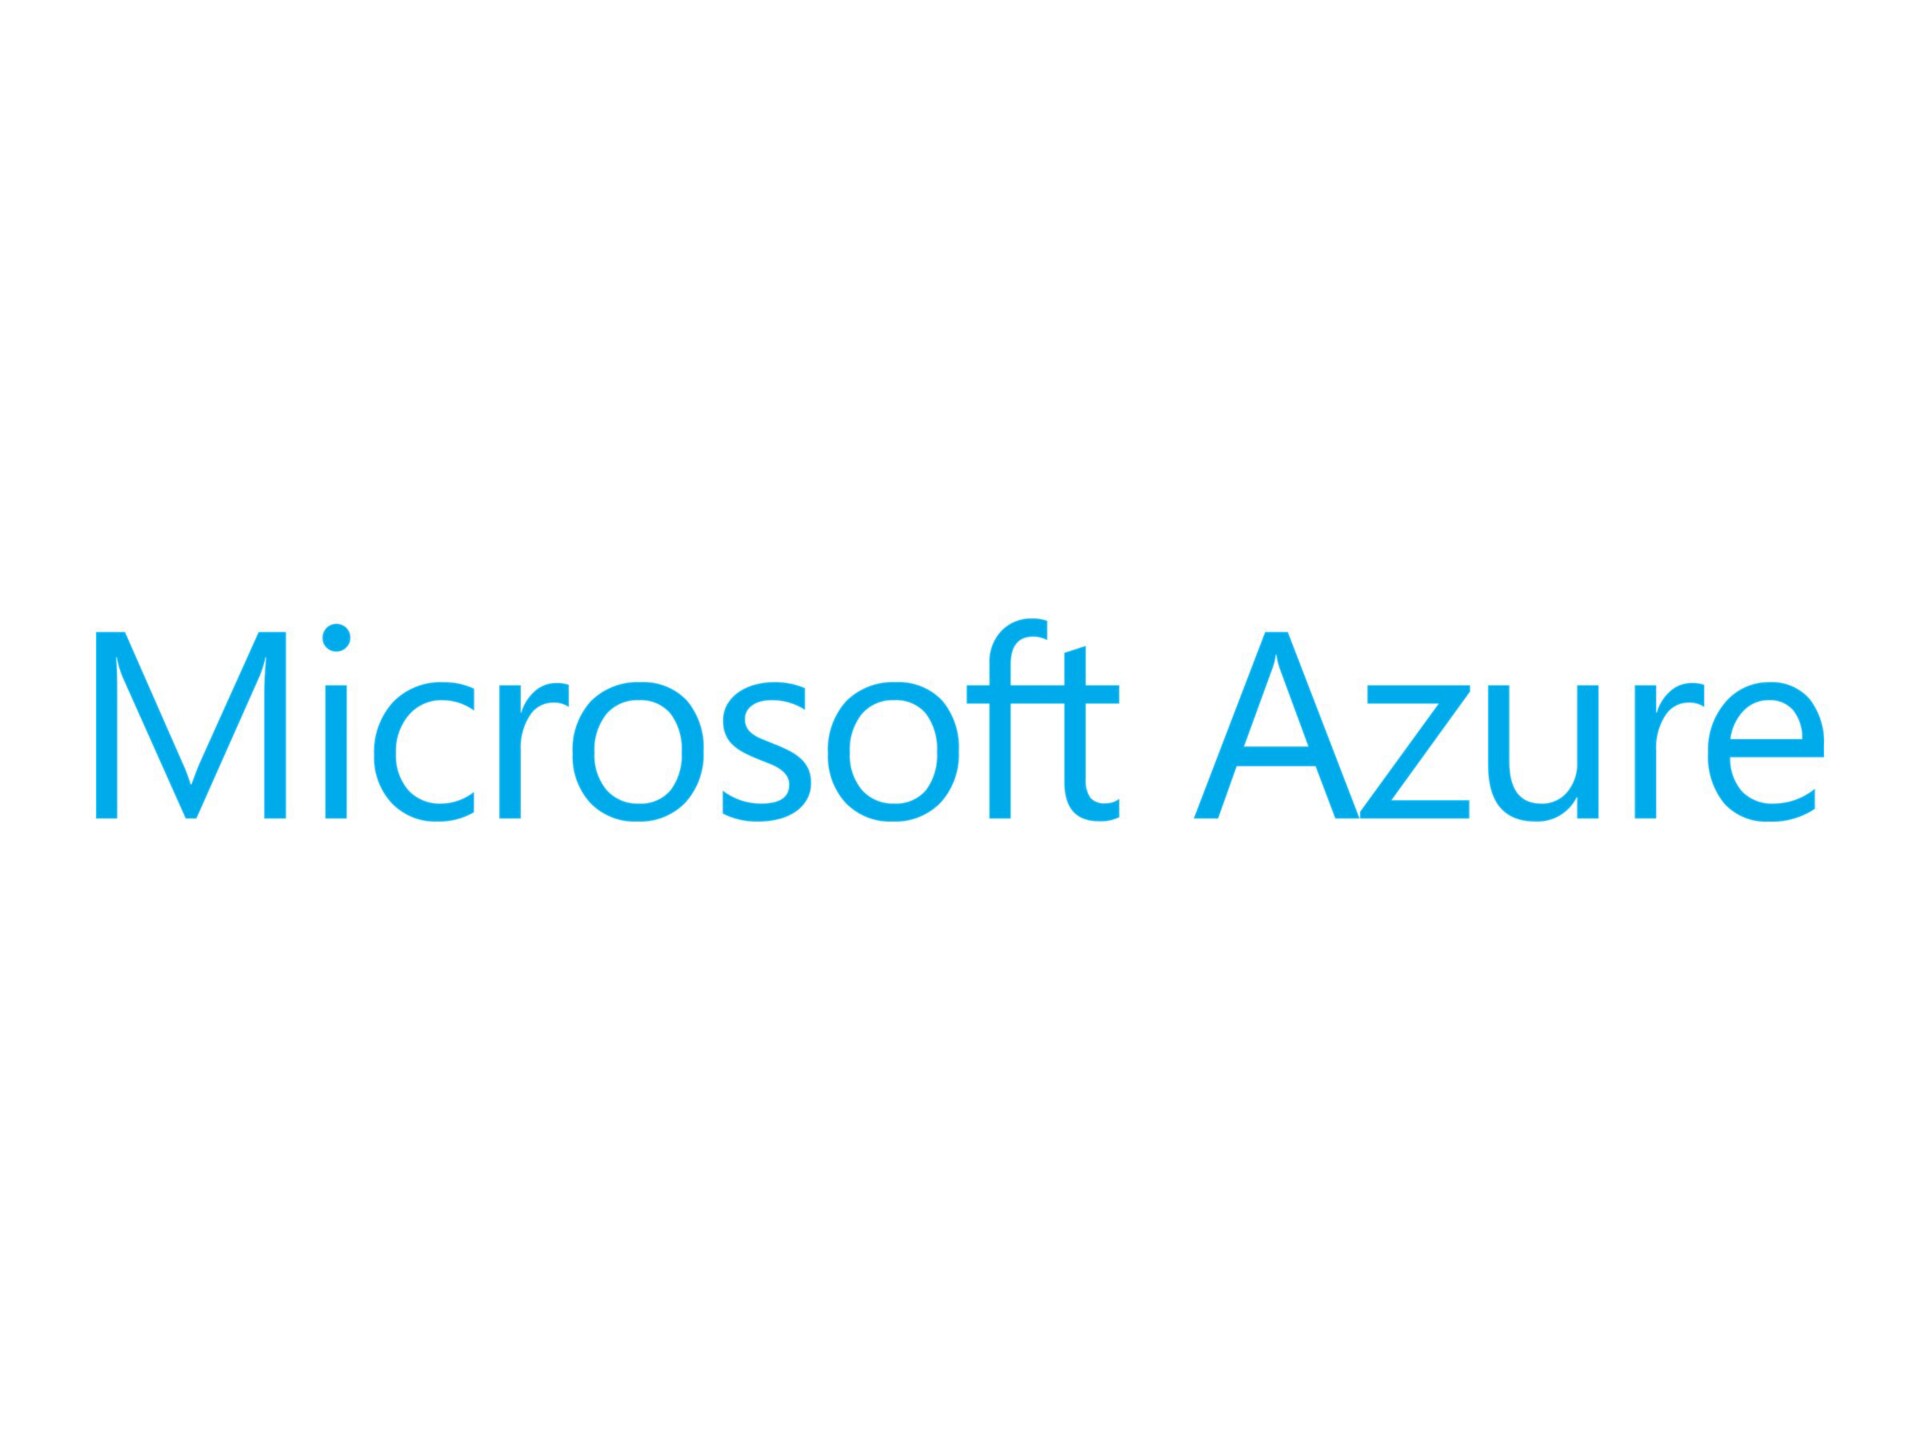 Microsoft Azure Networking - overage fee - 200 reserved IP addresses / hours